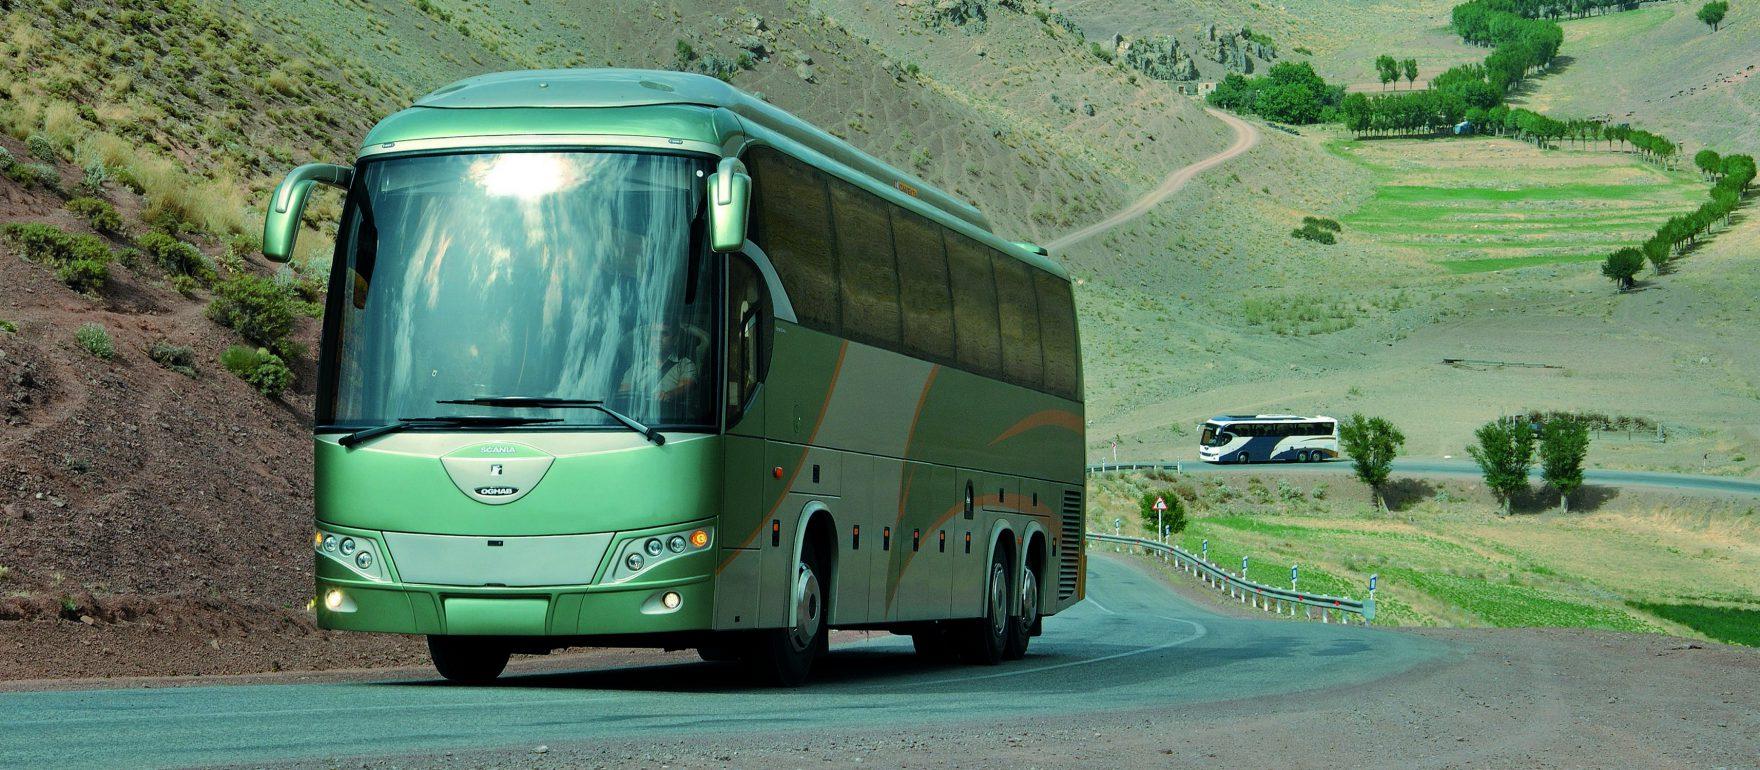 New buses to be imported for Iran’s Tehran city